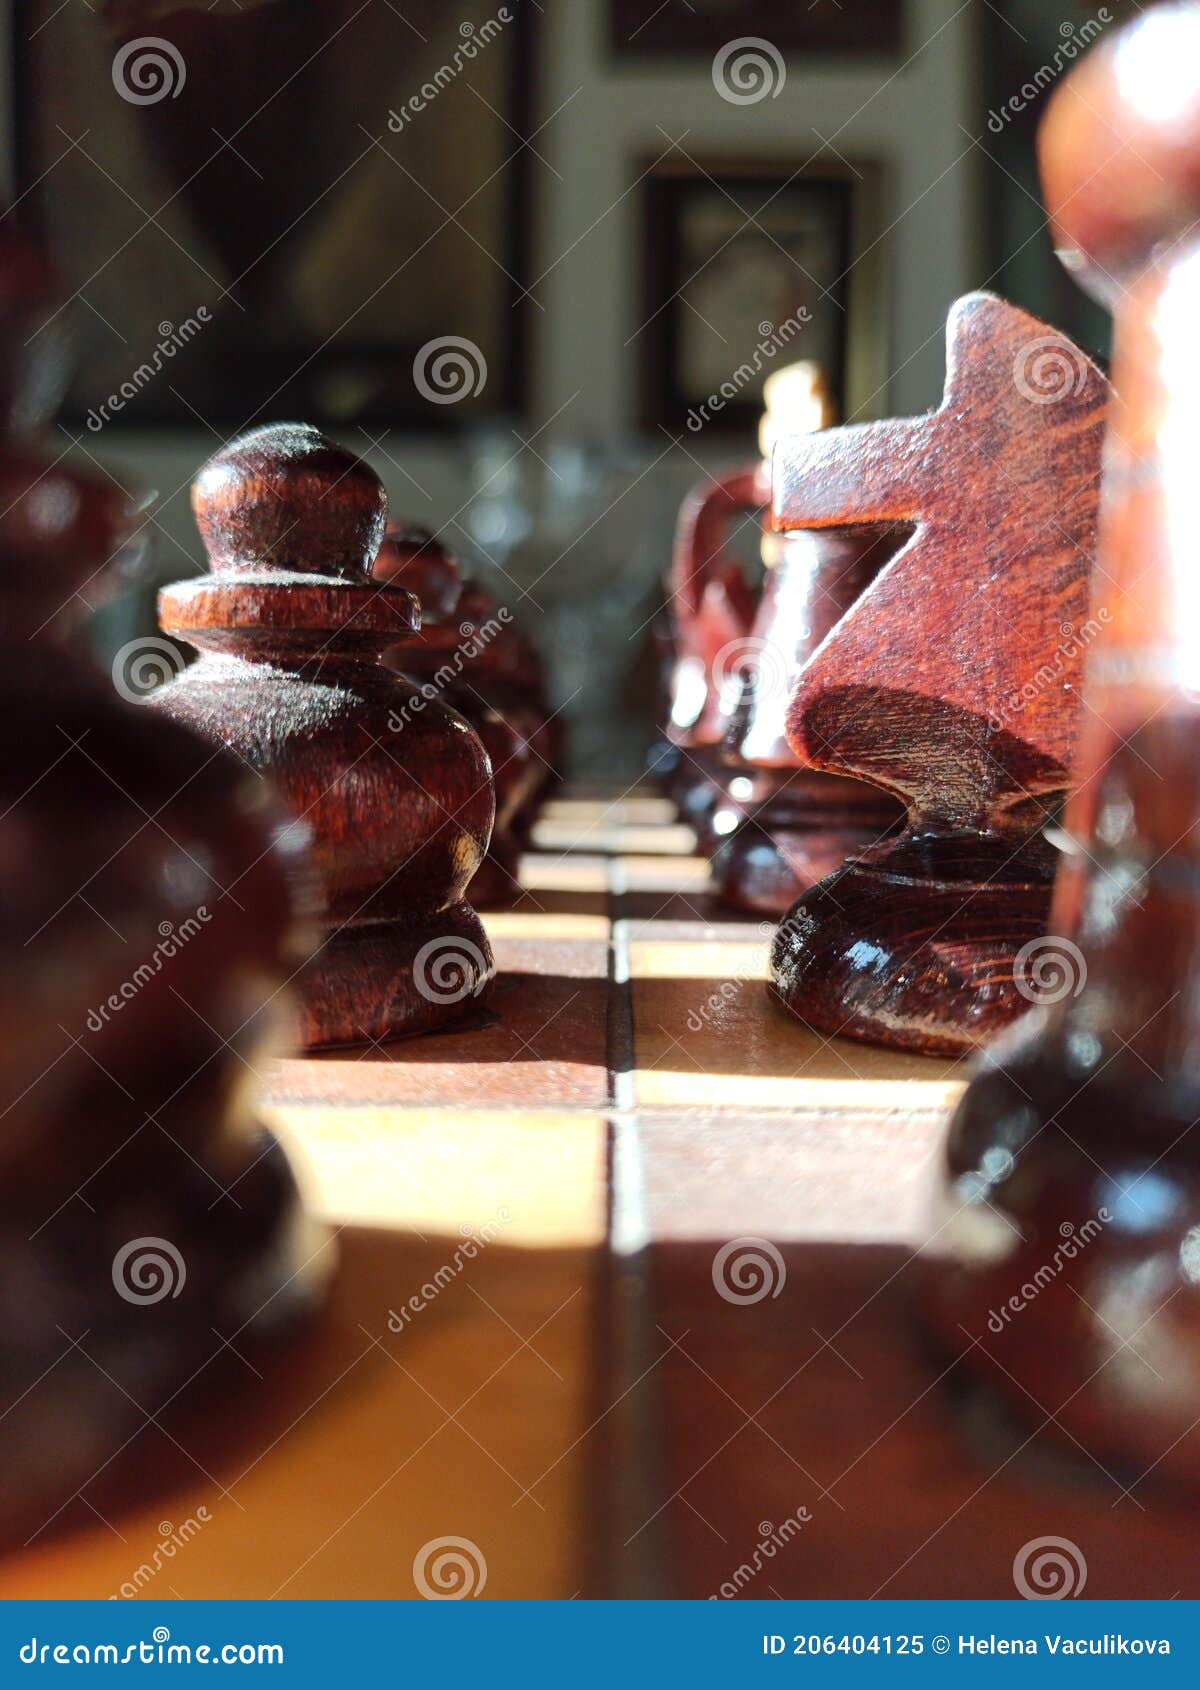 Chess Players during Playing at Local Tournament Editorial Stock Photo -  Image of aged, horse: 112934768